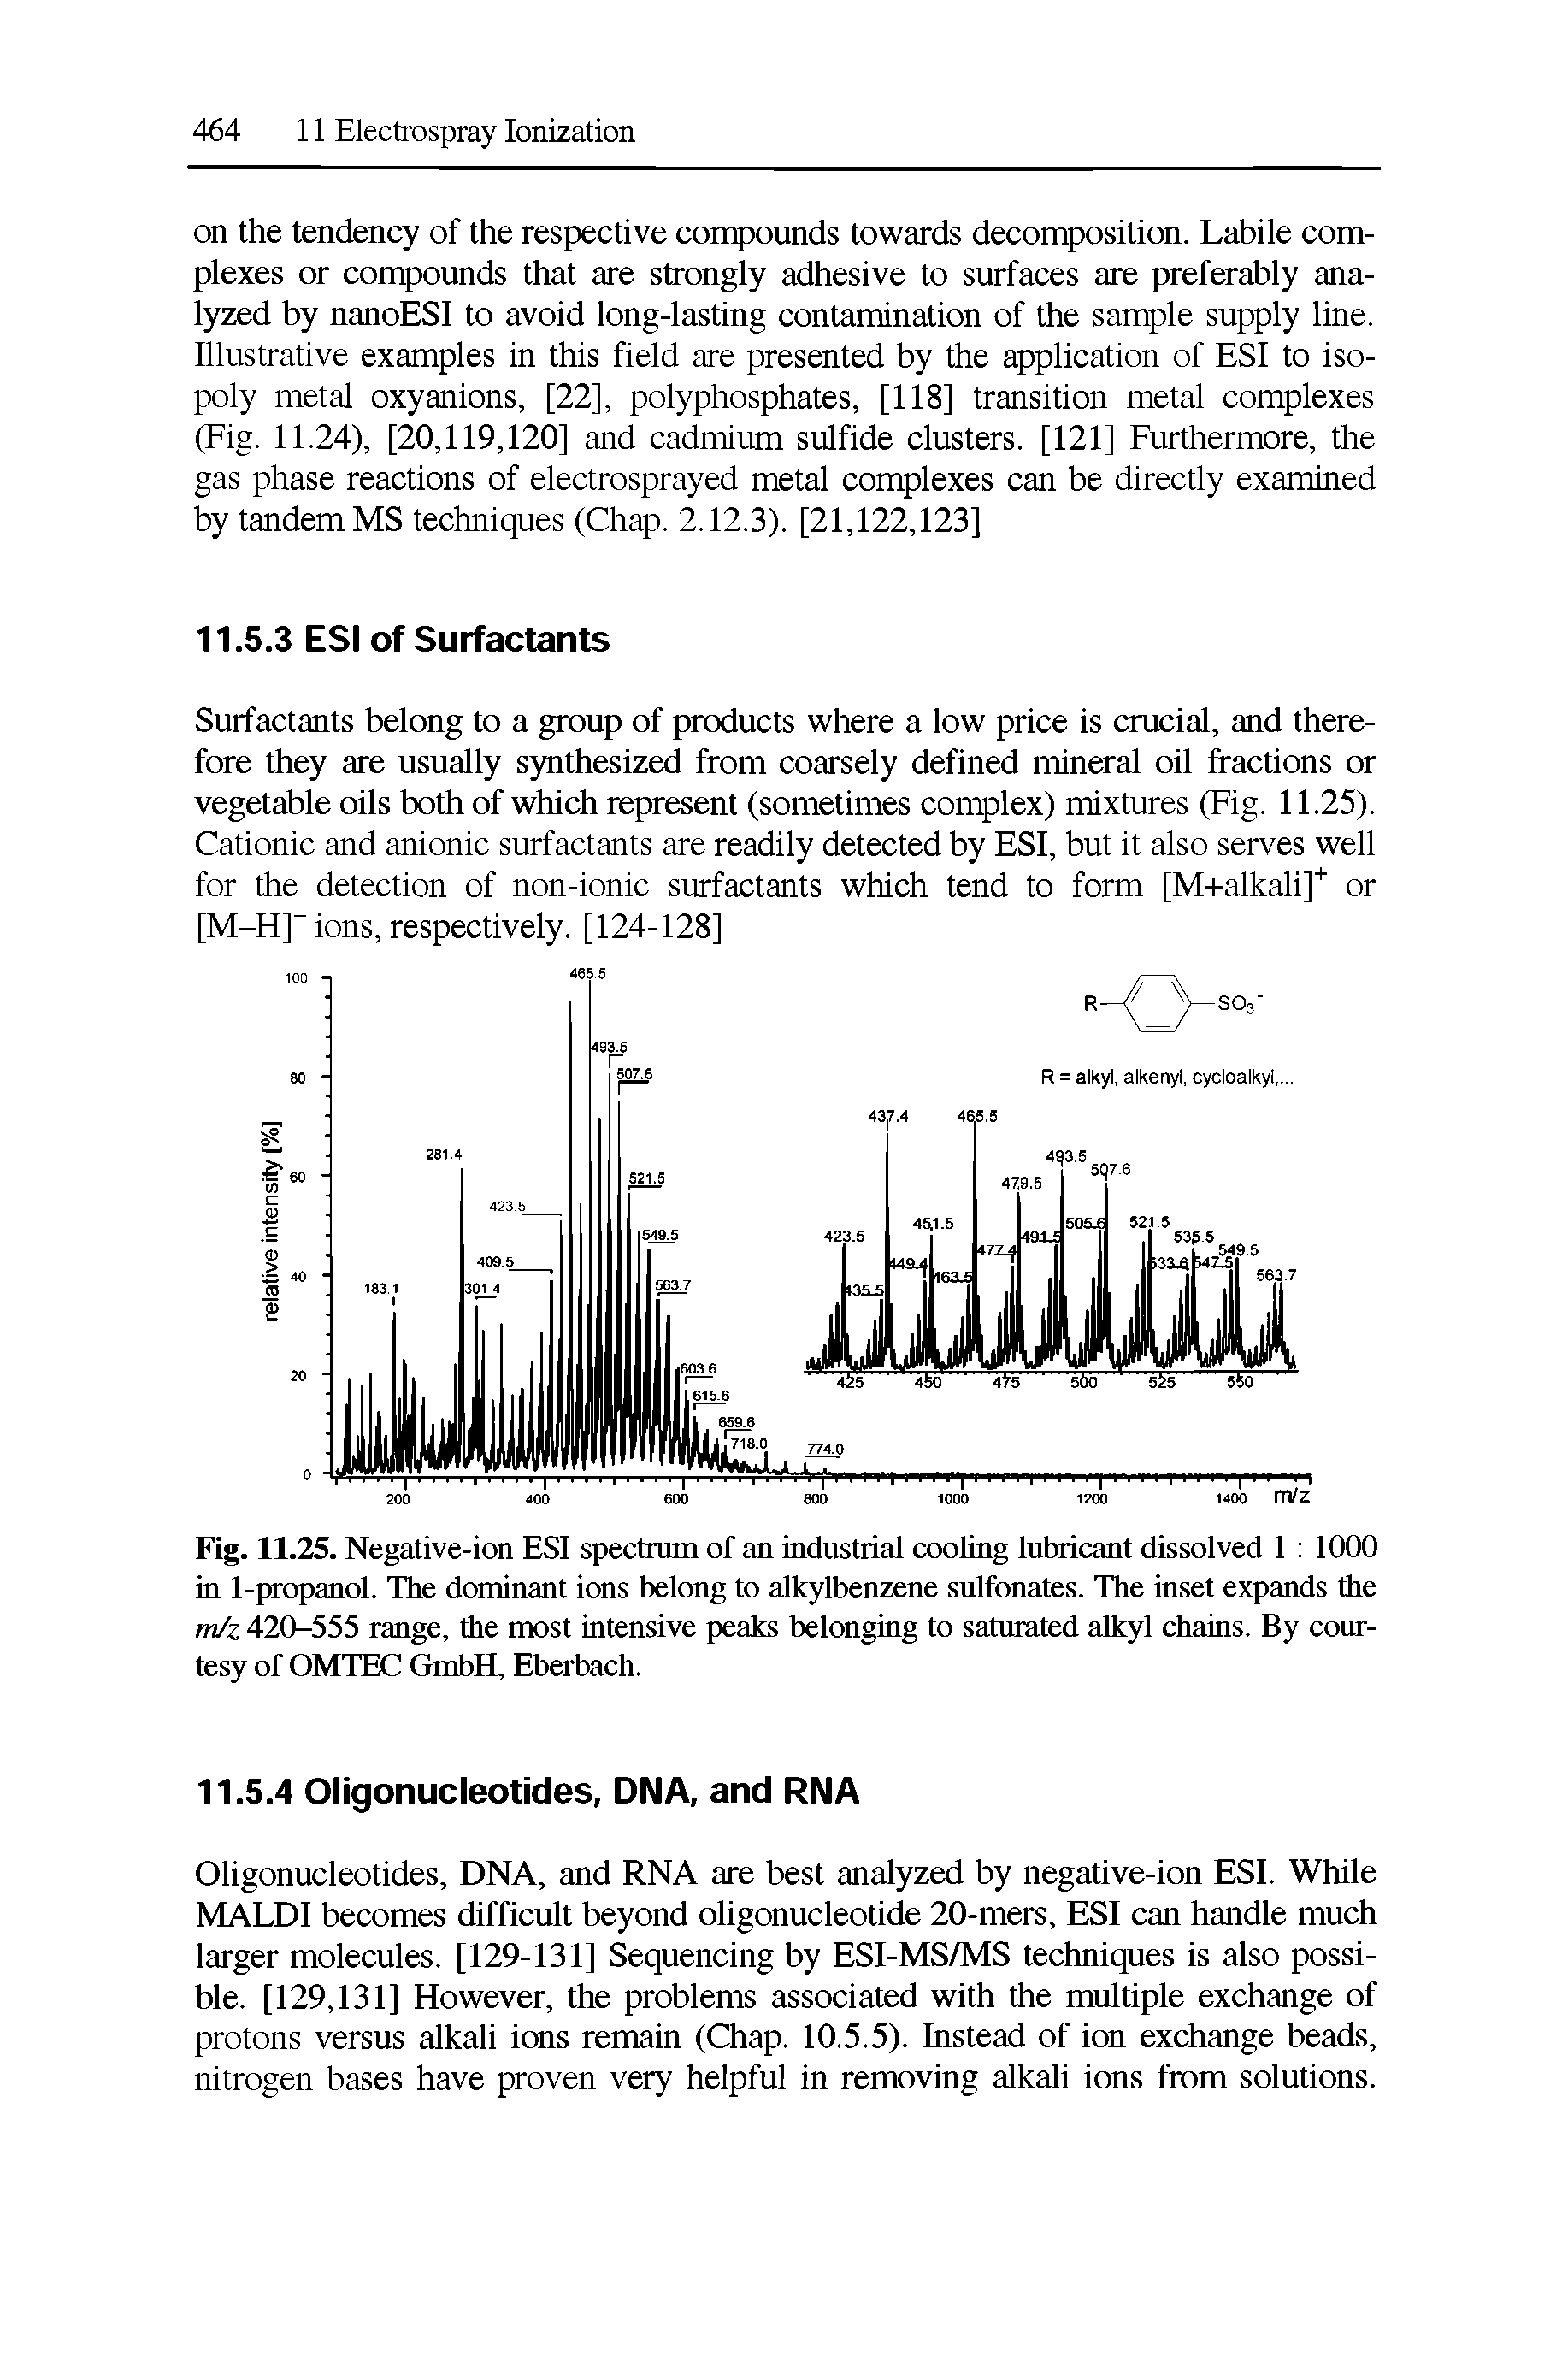 Fig. 11.25. Negative-ion ESI spectrum of an industrial cooling lubricant dissolved 1 1000 in 1-propanol. The dominant ions belong to aUcylbenzene sulfonates. The inset expands the mJz 420-555 range, the most intensive peaks belonging to saturated alkyl chains. By courtesy of OMTEC GmbH, Eberbach.